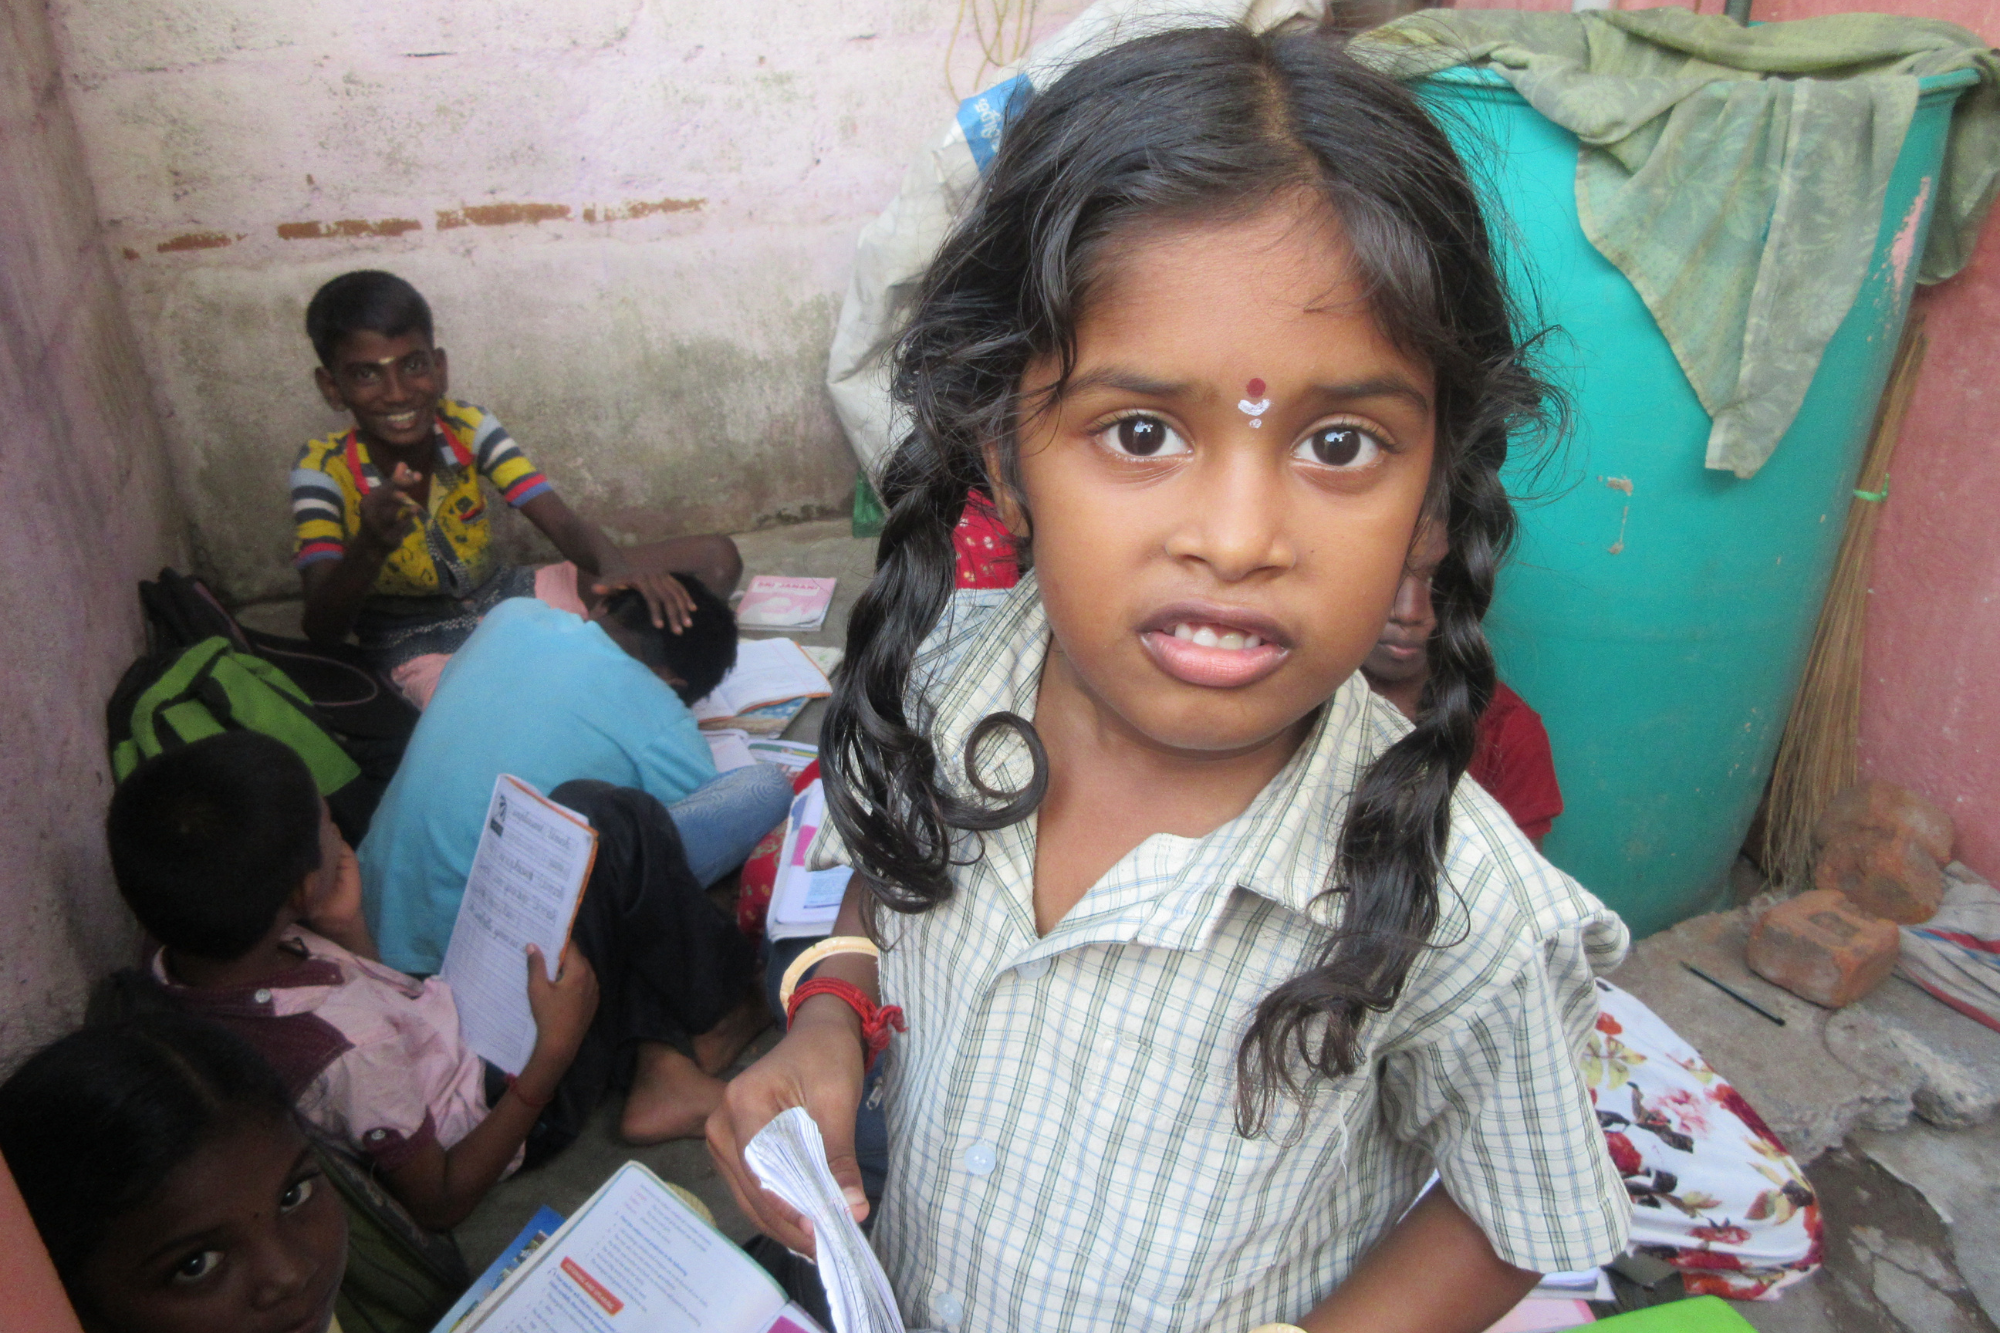 A young girl in Chennai, India who receives education through Marialaya